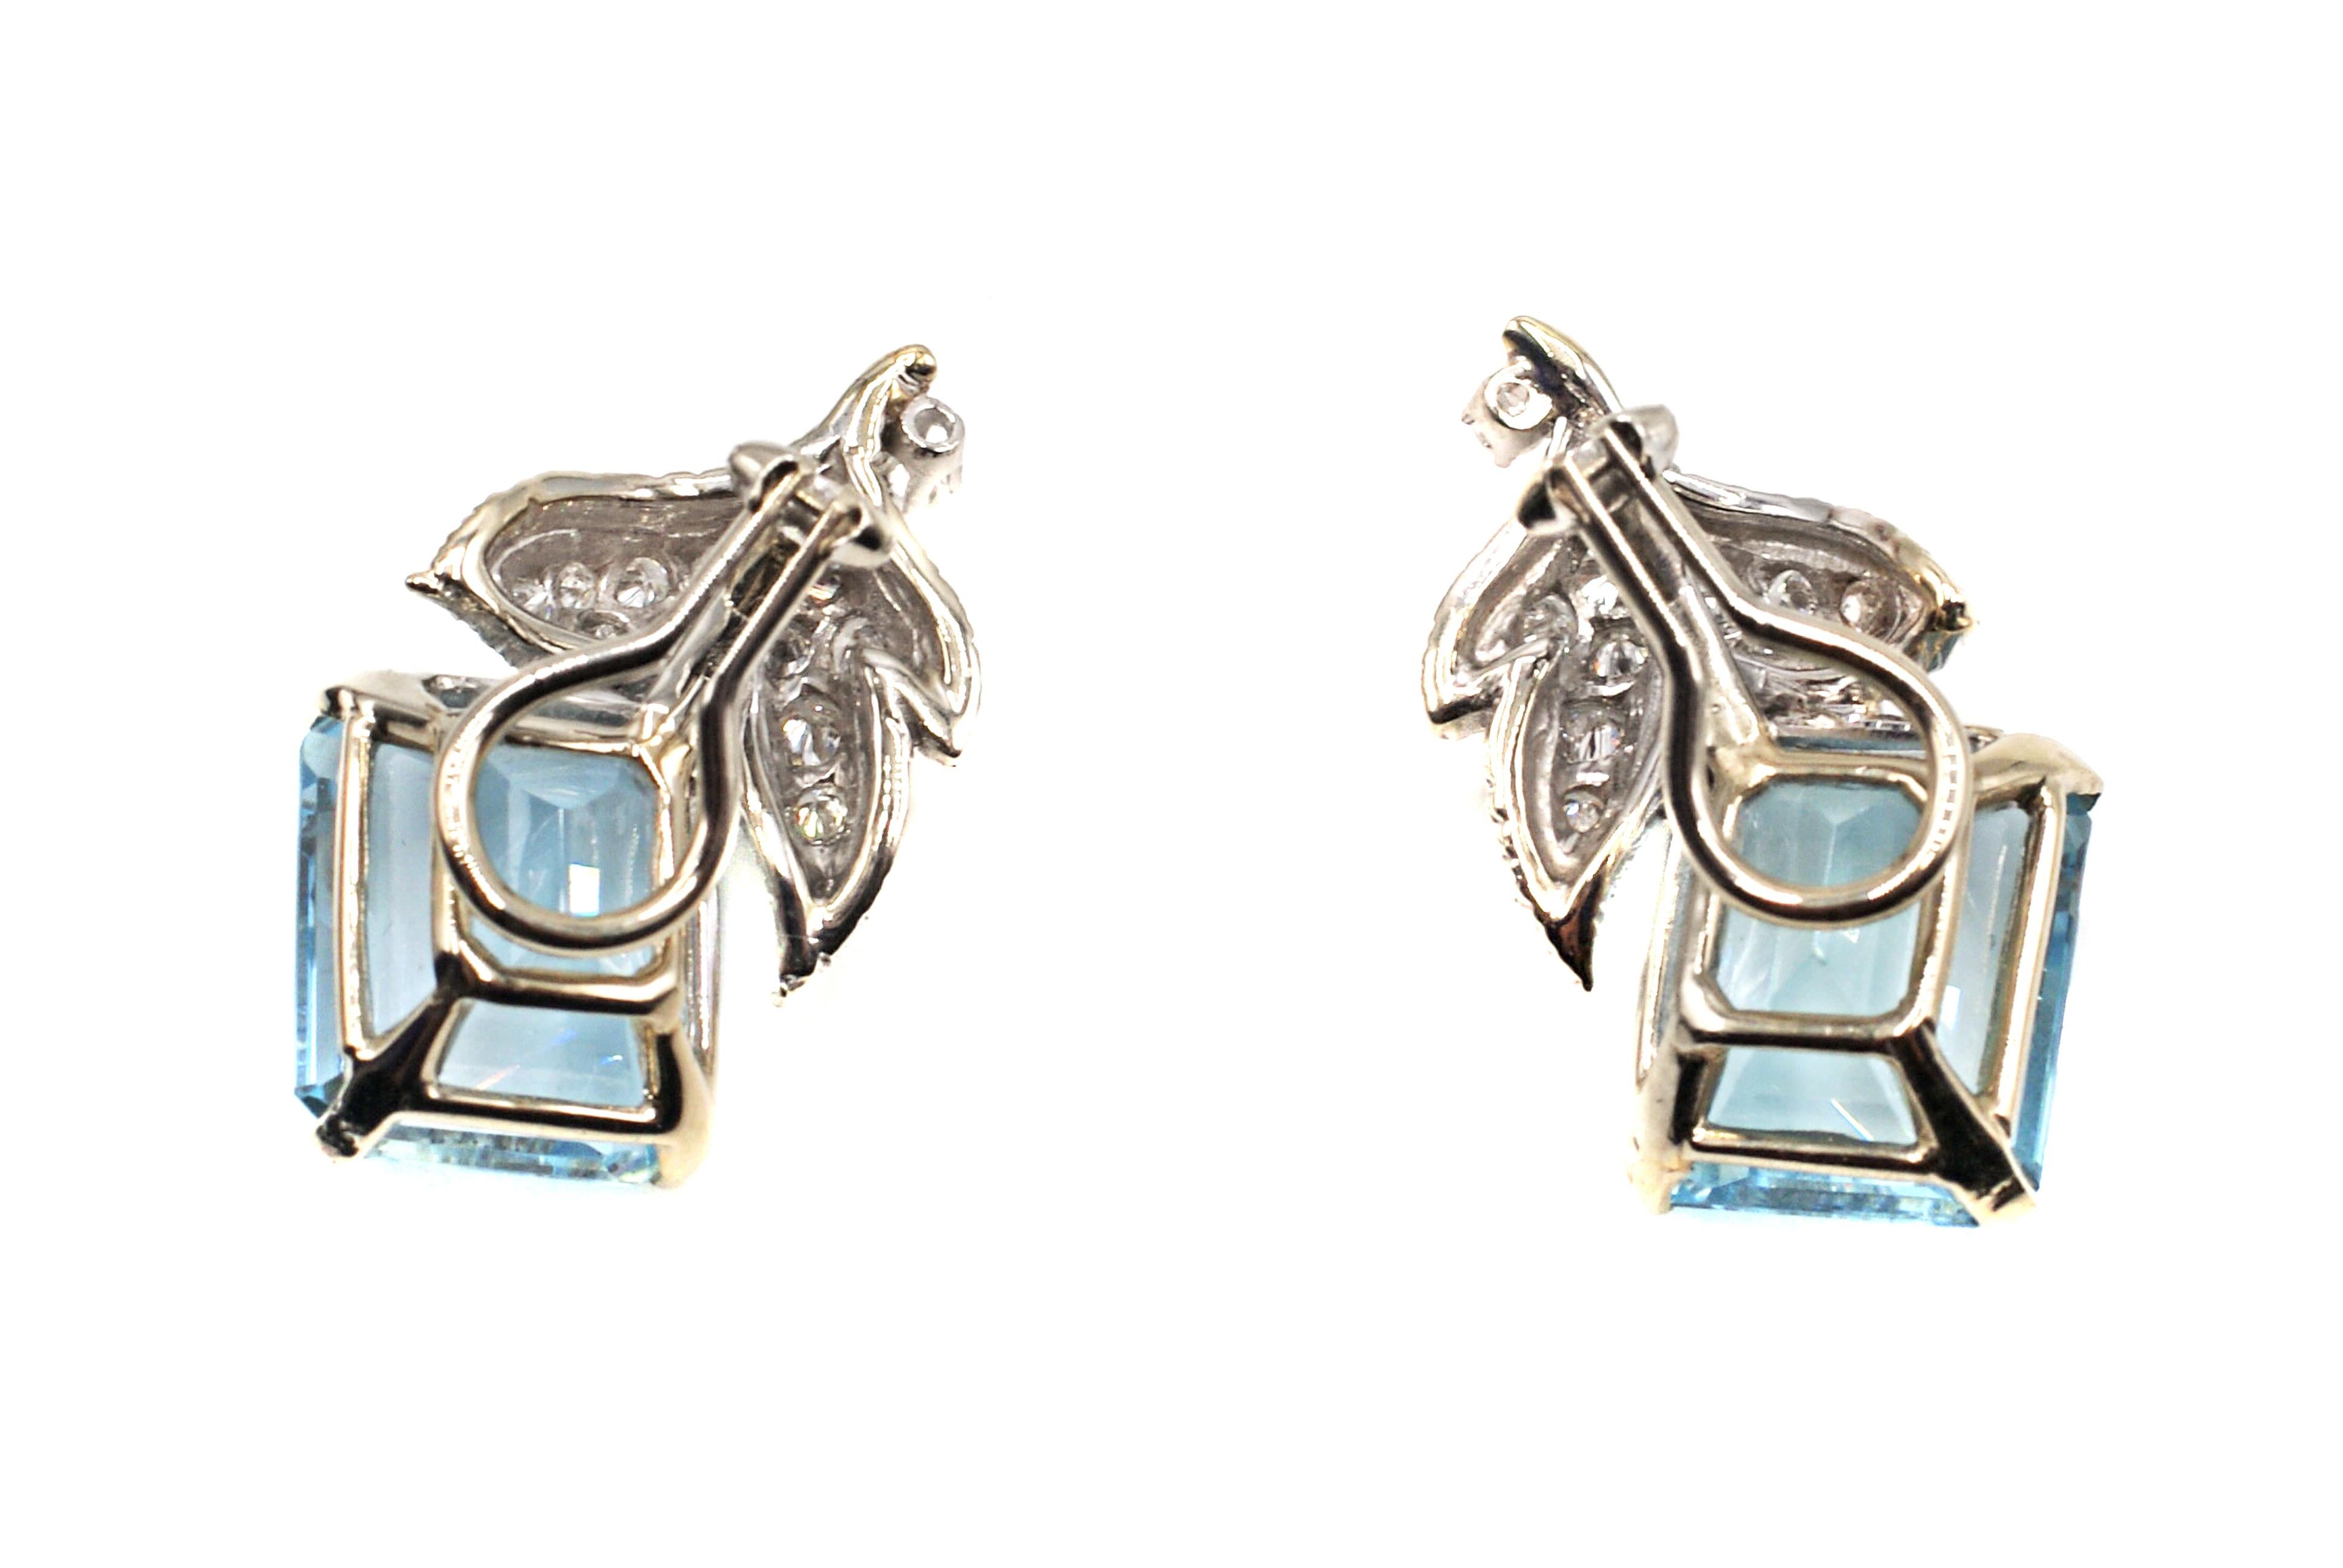 This pair of stunning and chic platinum earrings are set with 2 lively and brilliant sky-blue rectangular step-cut aquamarines.  Both Aquamarines are measured to weigh approximately 10 carats each with a combined total weight of approximately 20